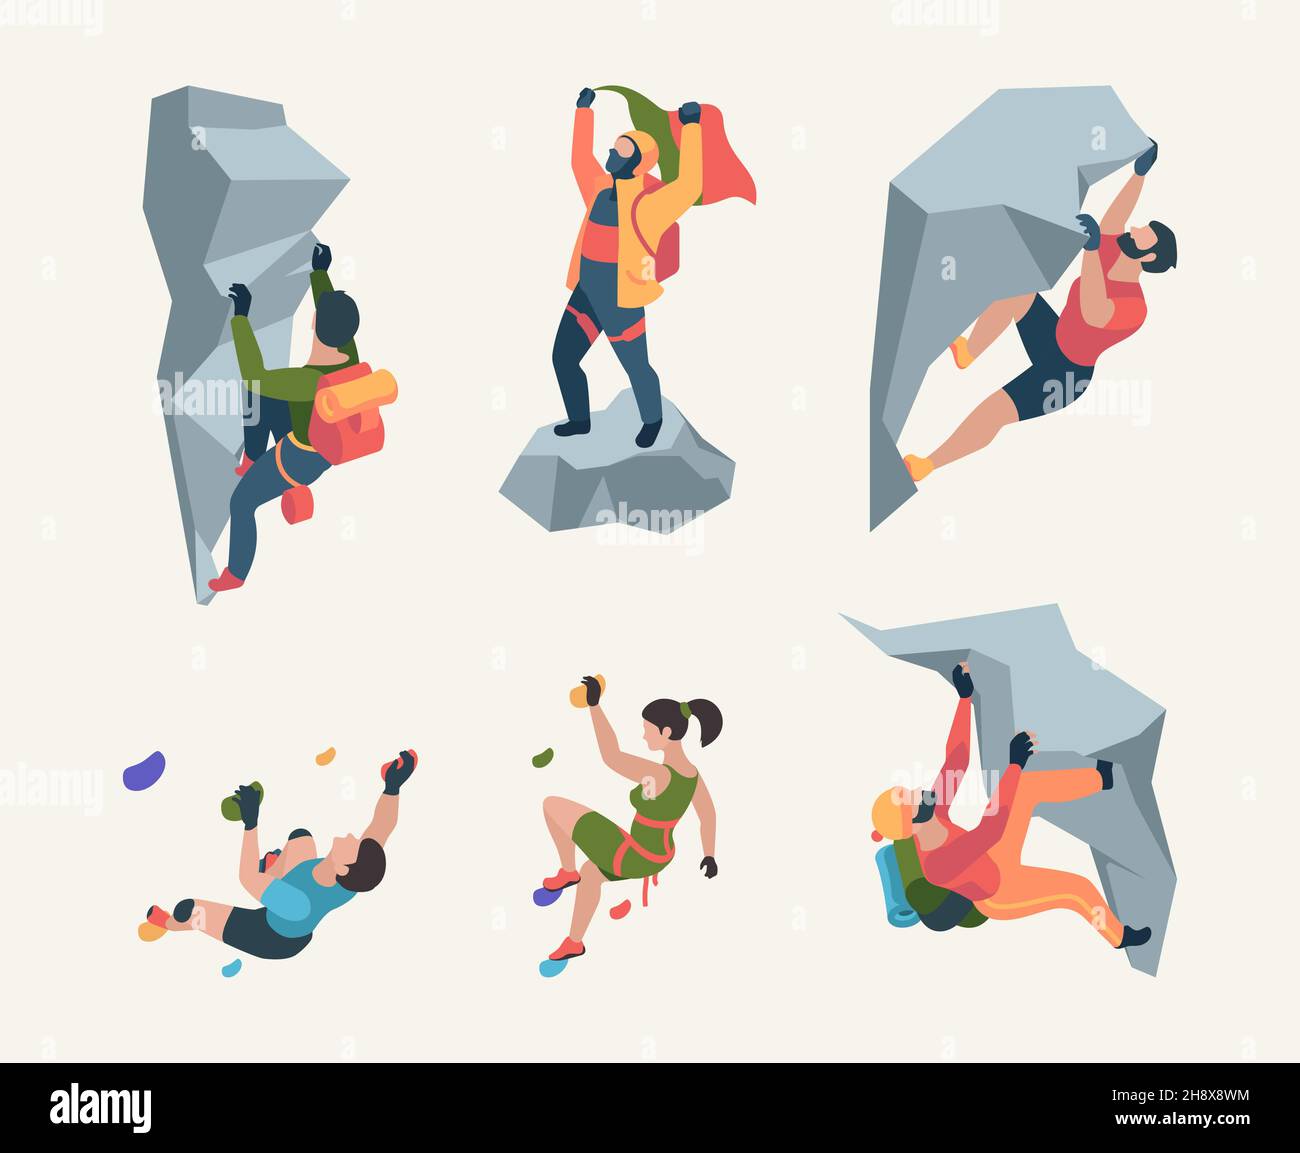 Wall climbers. Mountain rock climbers person sport team people healthy active lifestyle activities garish vector isometric collection Stock Vector